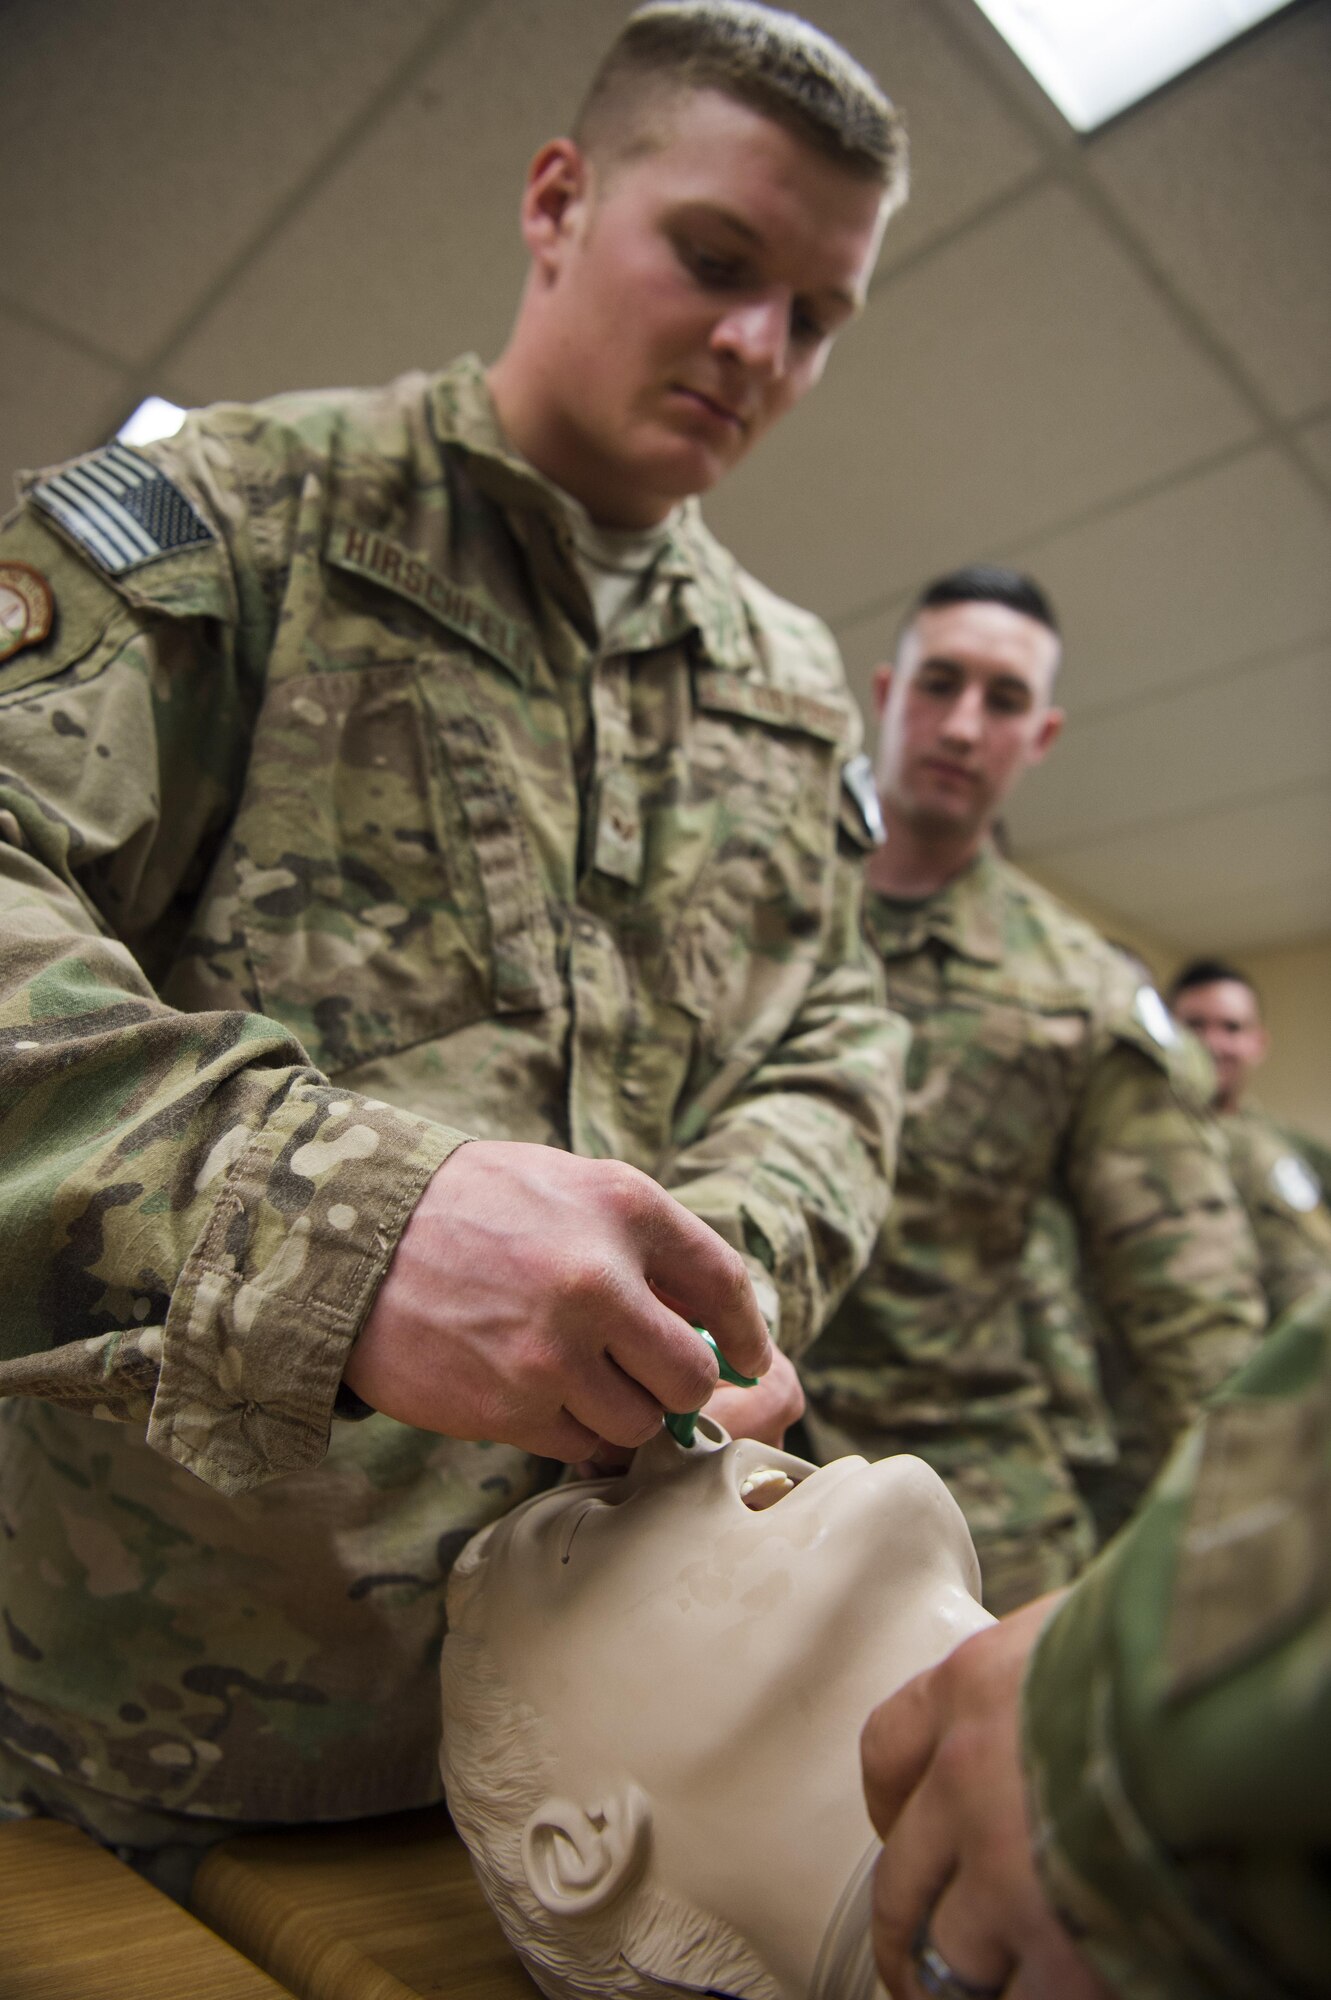 Senior Airman Donovan Hirschfeld, 790th Missile Security Forces Squadron tactical response force assaulter, applies a nasopharyngeal tube to a test head during a Trauma Casualty Care Course on F.E. Warren Air Force Base, Wyo., March 3, 2017. Lifesaving skills such as dressing wounds, applying splints, using combat gauze, proper use of tourniquets, nasopharyngeal airway training and body drag and carries were taught during the course. The Defense Medical Readiness Training Institute hosted the course. DMTRI is a tri-service organization that offers both resident and non-resident joint medical readiness training courses across the military. (U.S. Air Force photo by Staff Sgt. Christopher Ruano)